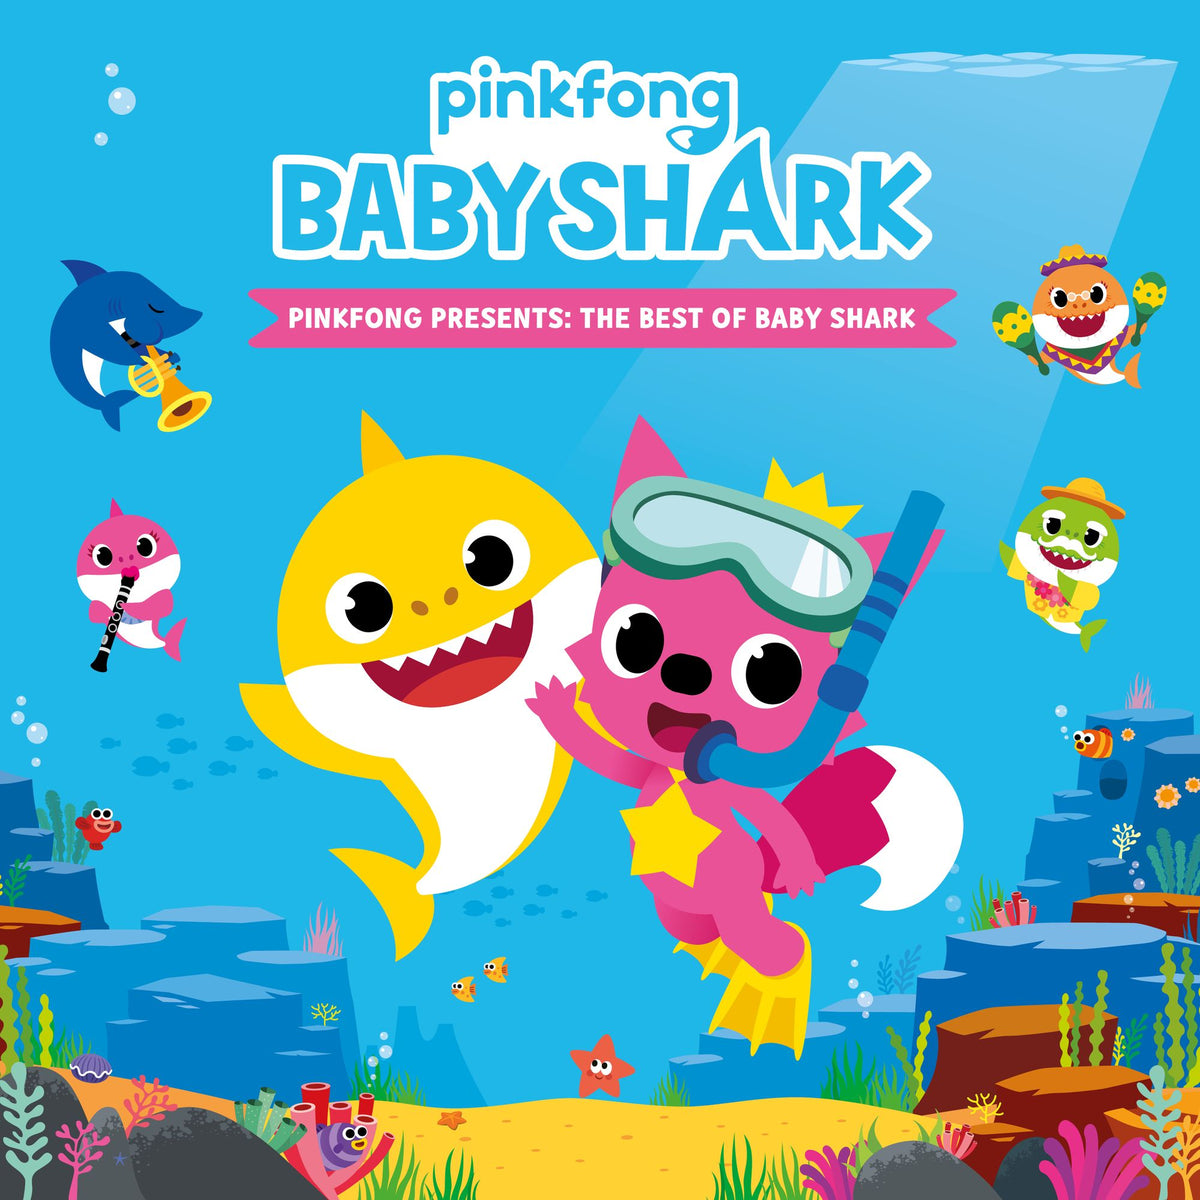 Pinkfong Presents:The Best Of Baby Shark